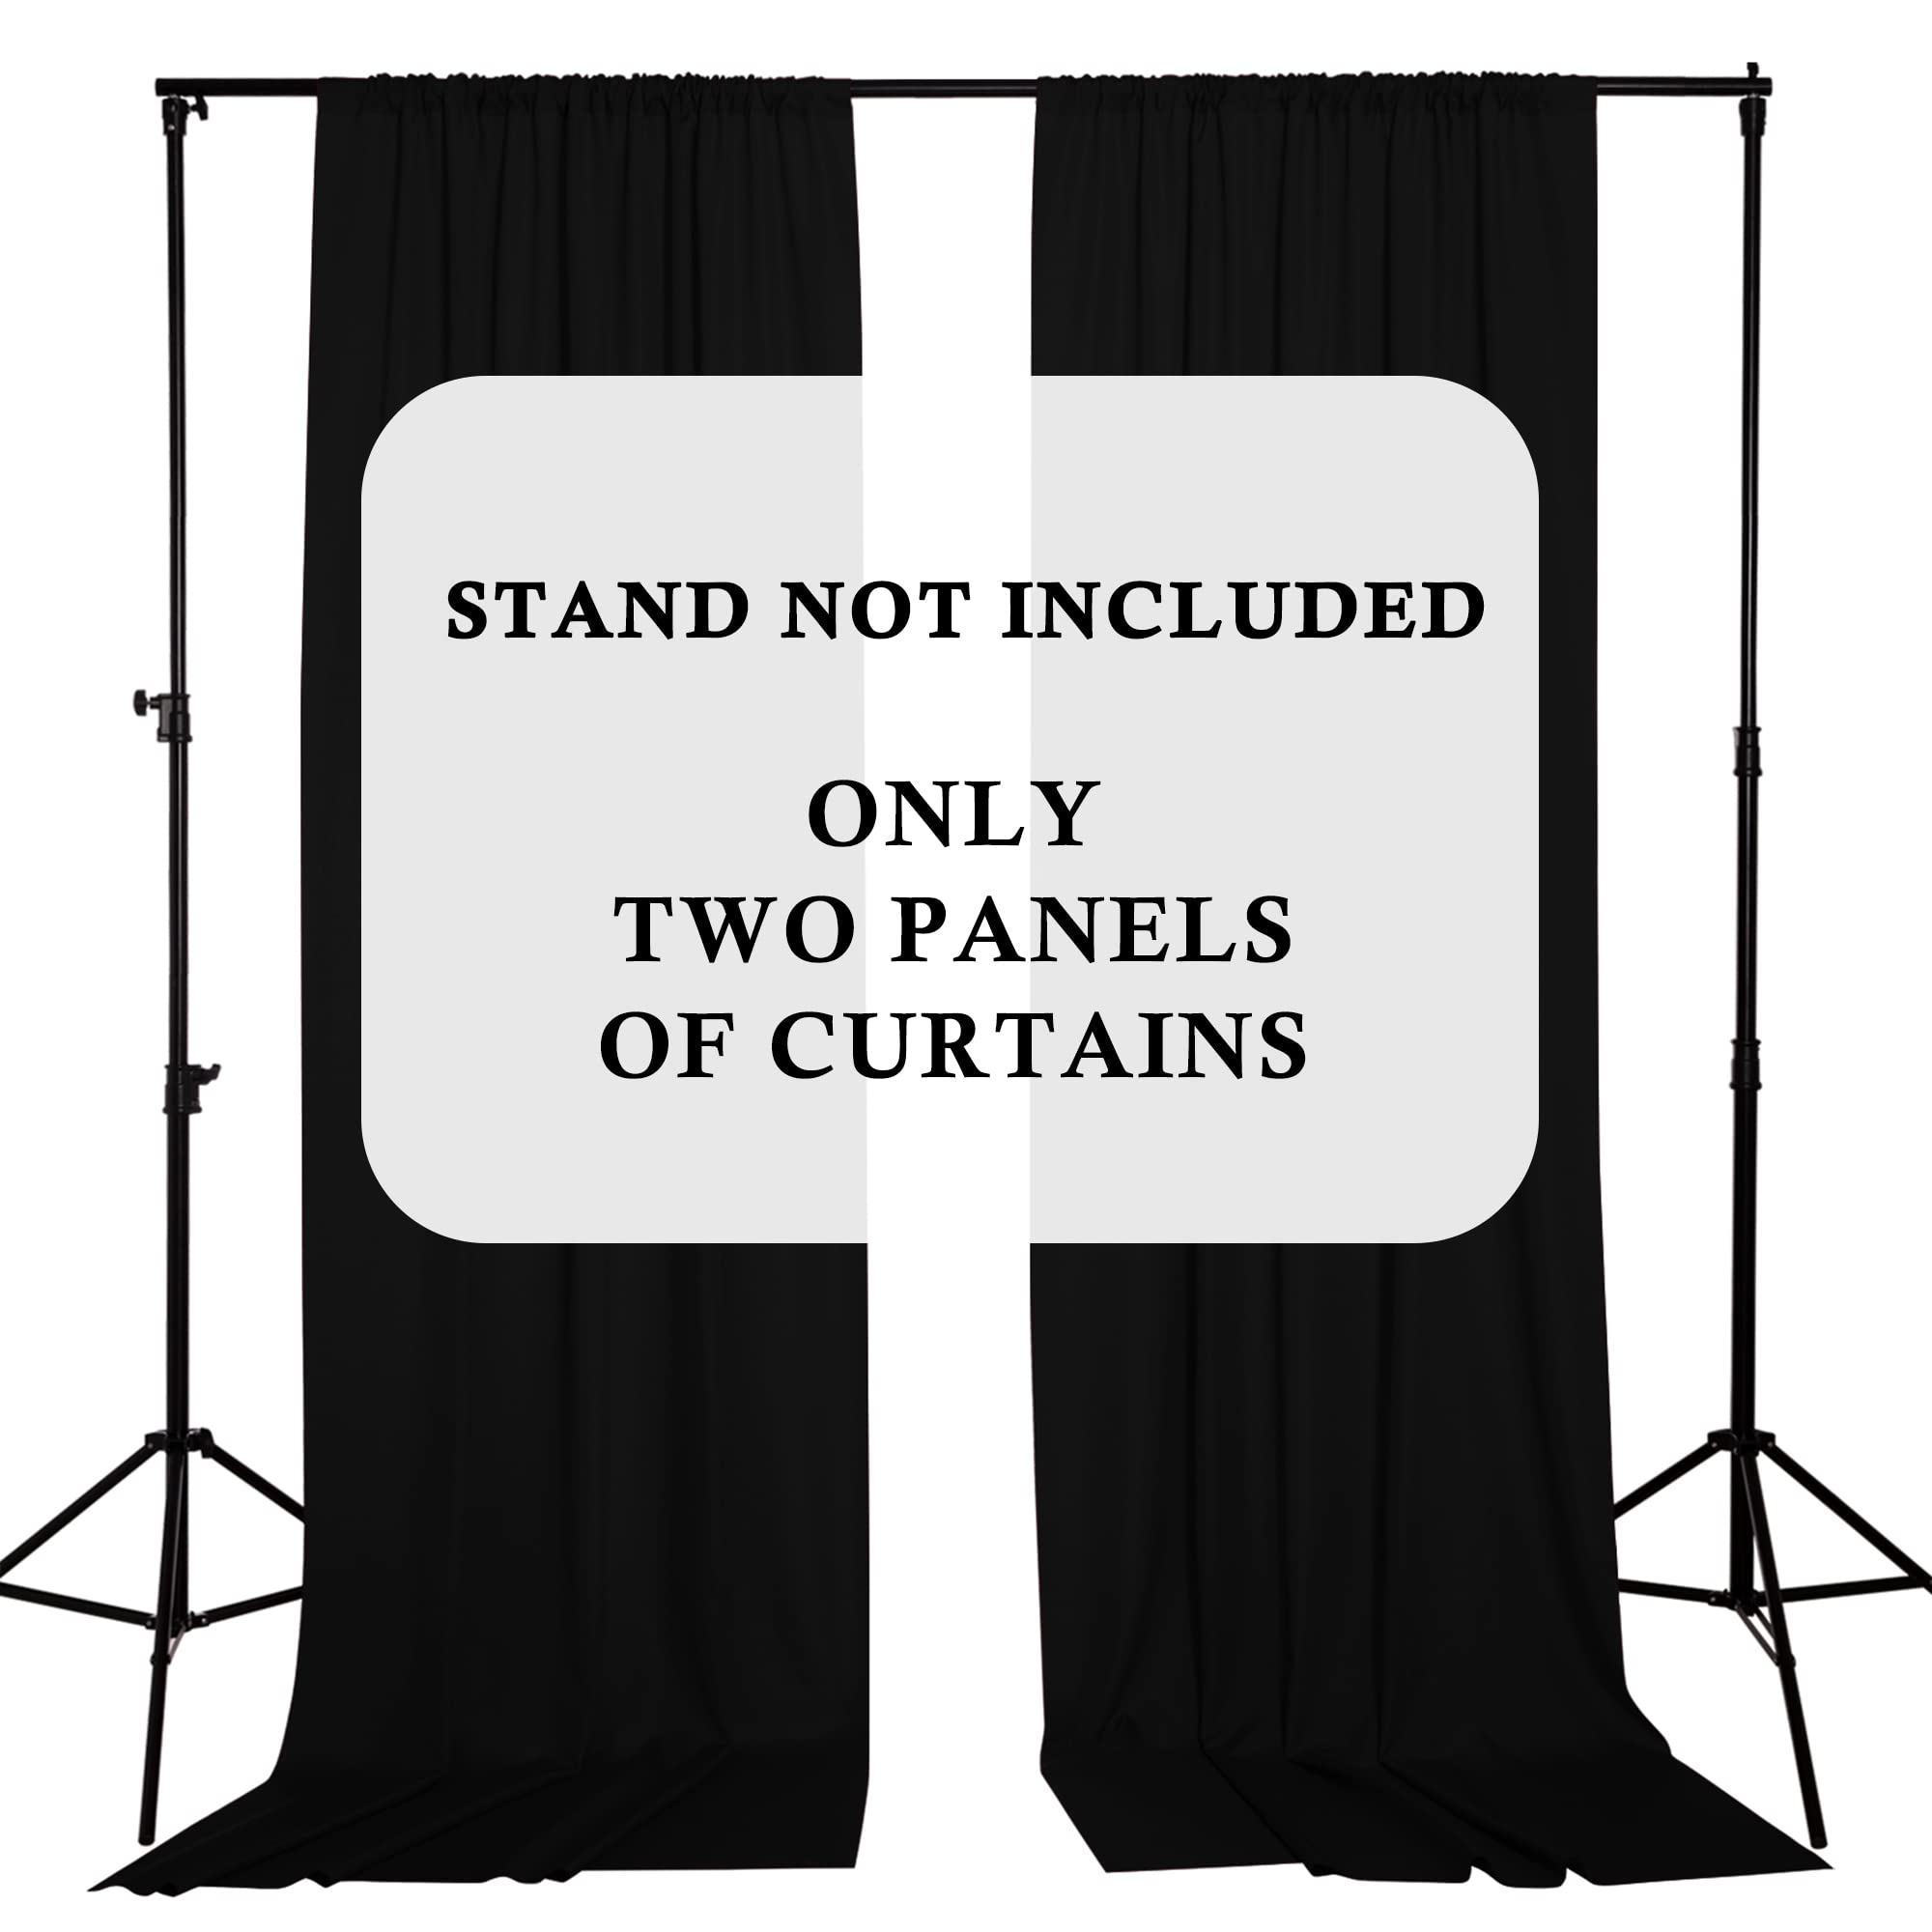 5 x 10 ft Backdrop Curtains for Parties Waterproof Home Theater Studio Backgrounds Wedding Stage Stand Panels 2 Panels